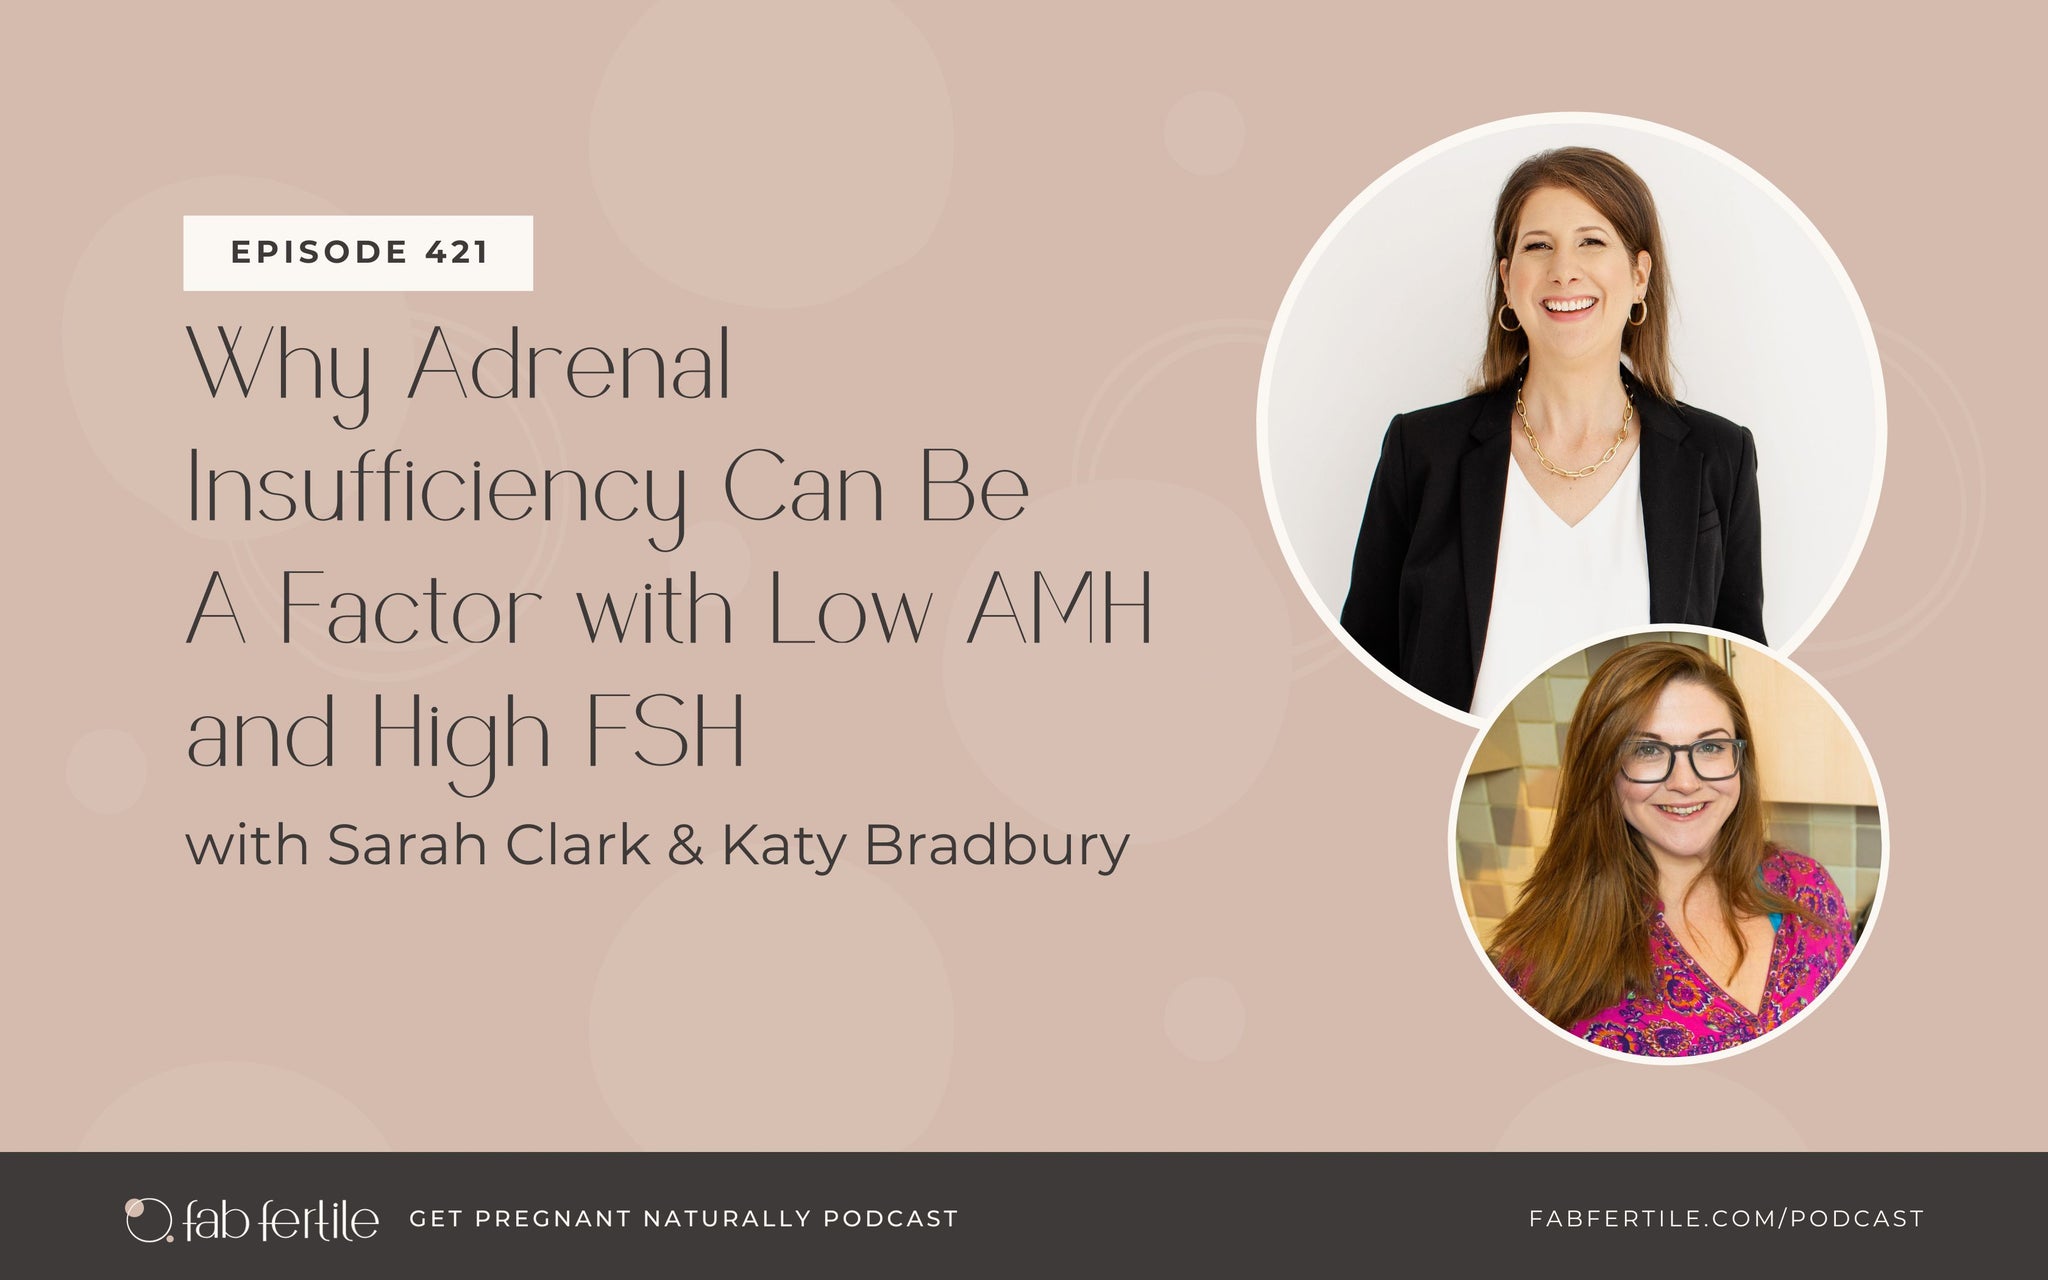 Why Adrenal Insufficiency Can Be A Factor with Low AMH and High FSH